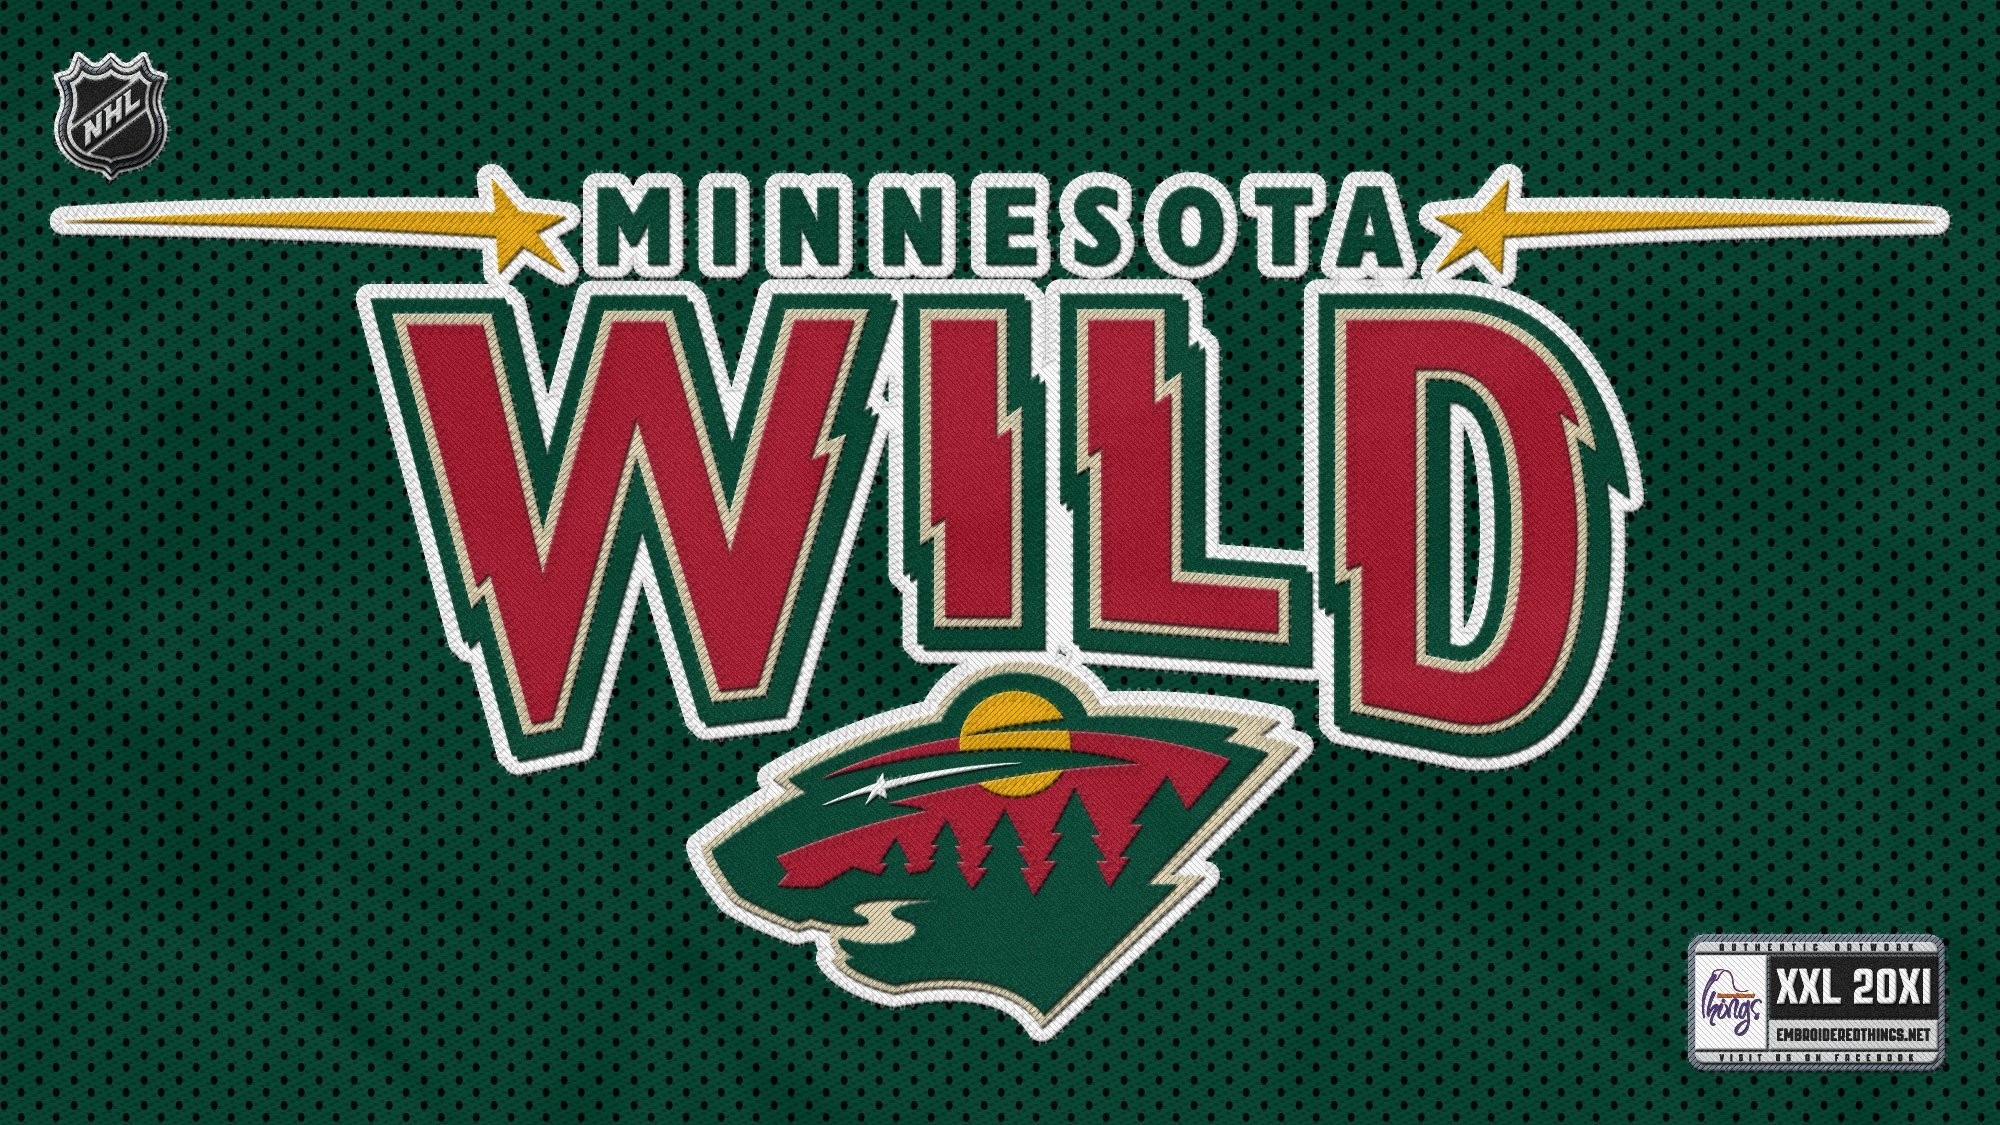 Minnesota Wild on Twitter Freshen up your wallpaper with these 𝒻𝓇𝑒𝓈𝒽   new  faces mnwild x WallpaperWednesday httpstcoefcA51rC9o  X